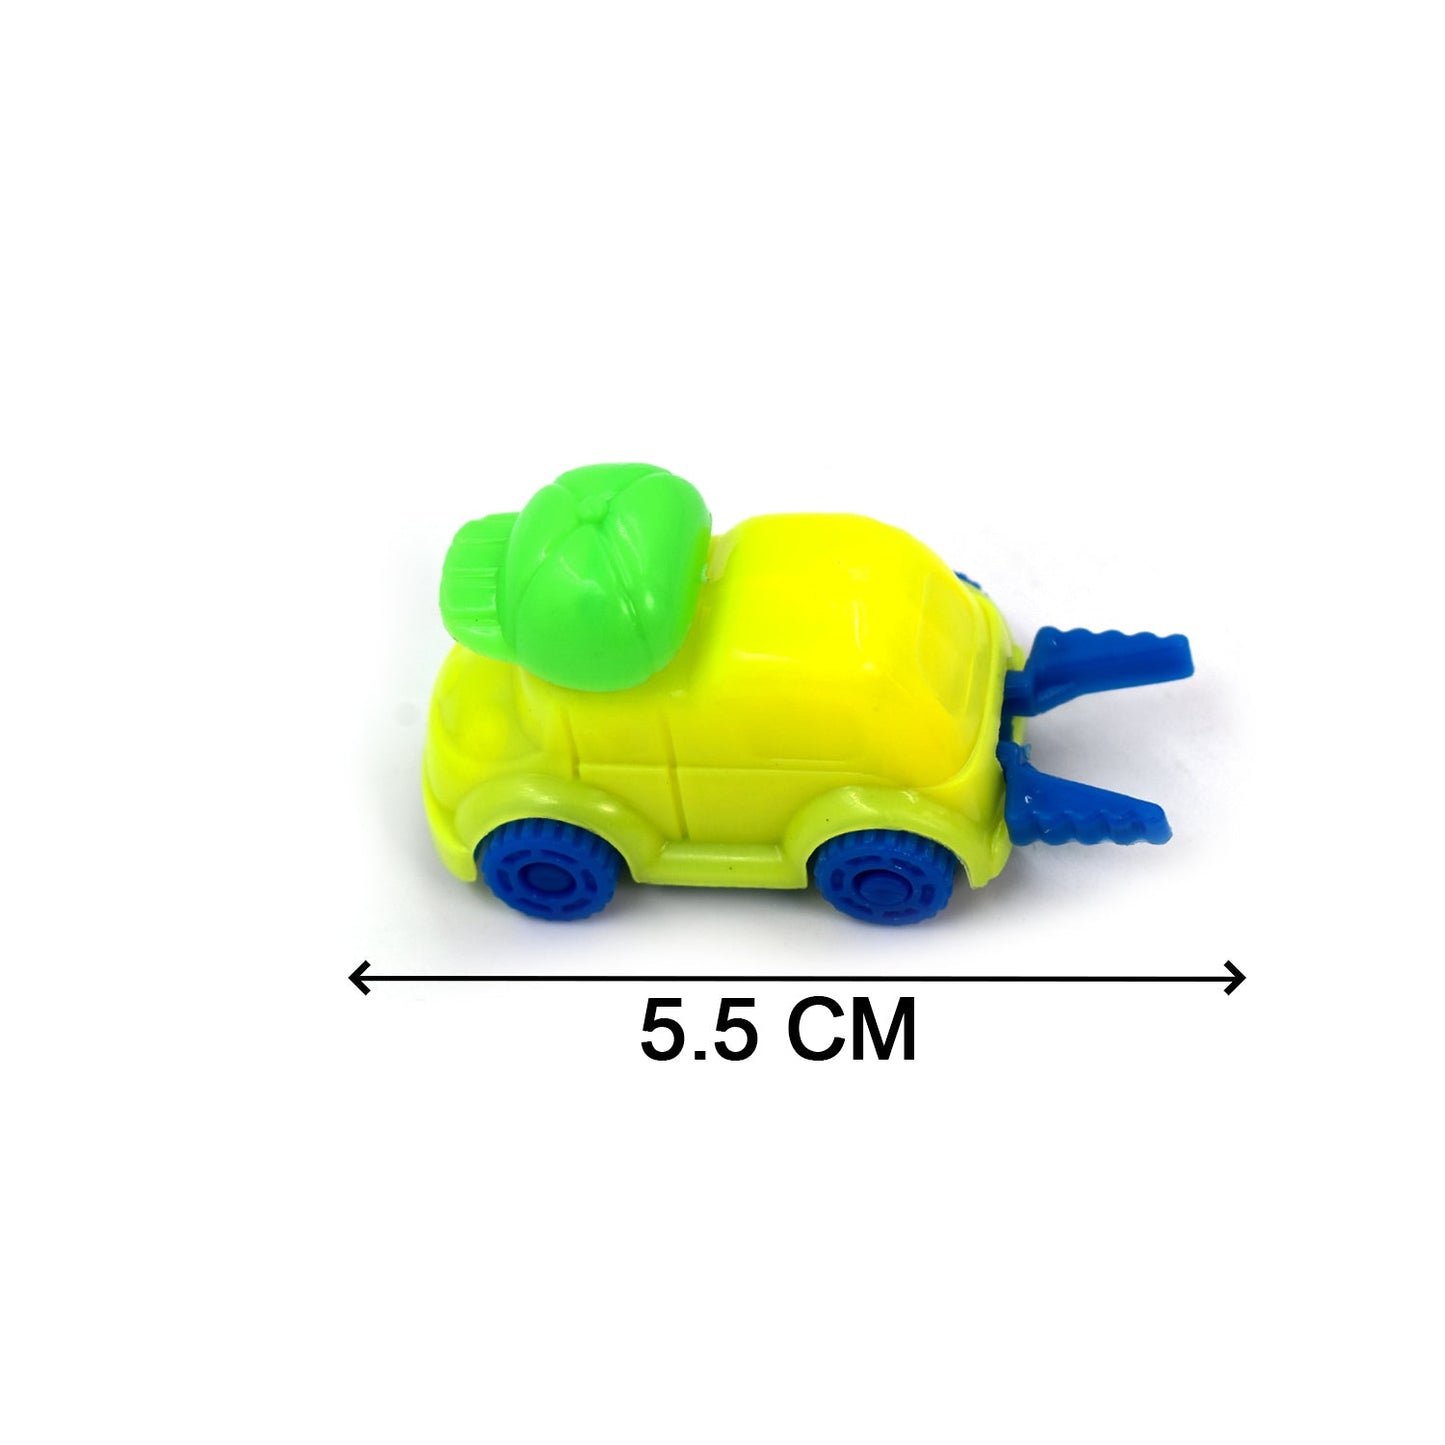 4422 30PC MINI PULL BACK CAR USED WIDELY BY KIDS AND CHILDRENS FOR PLAYING AND ENJOYING PURPOSES 